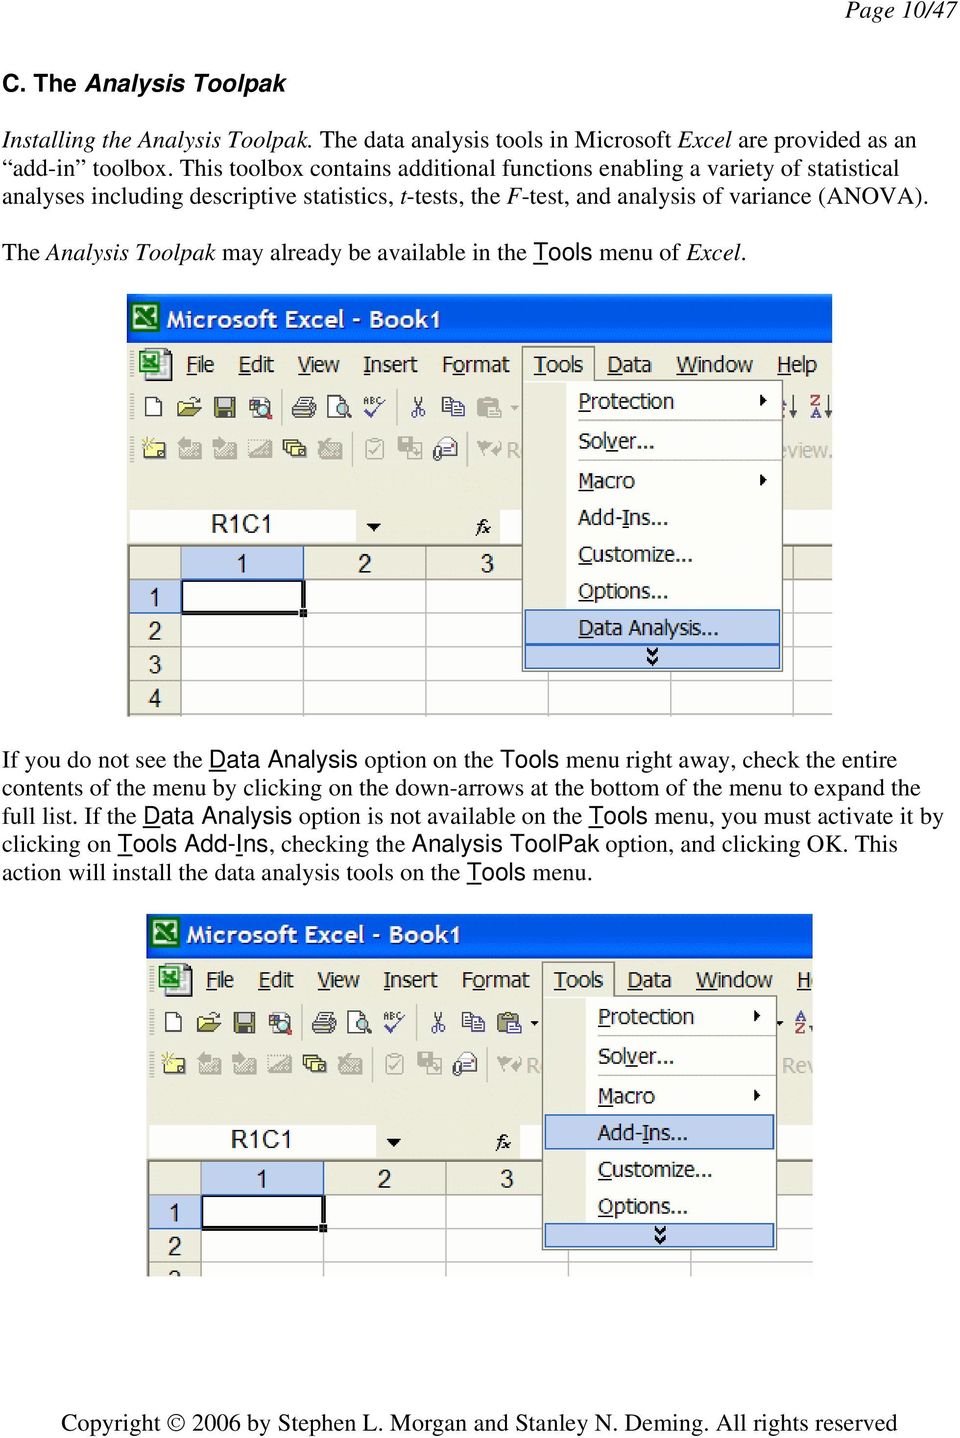 The Analysis Toolpak may already be available in the Tools menu of Excel.